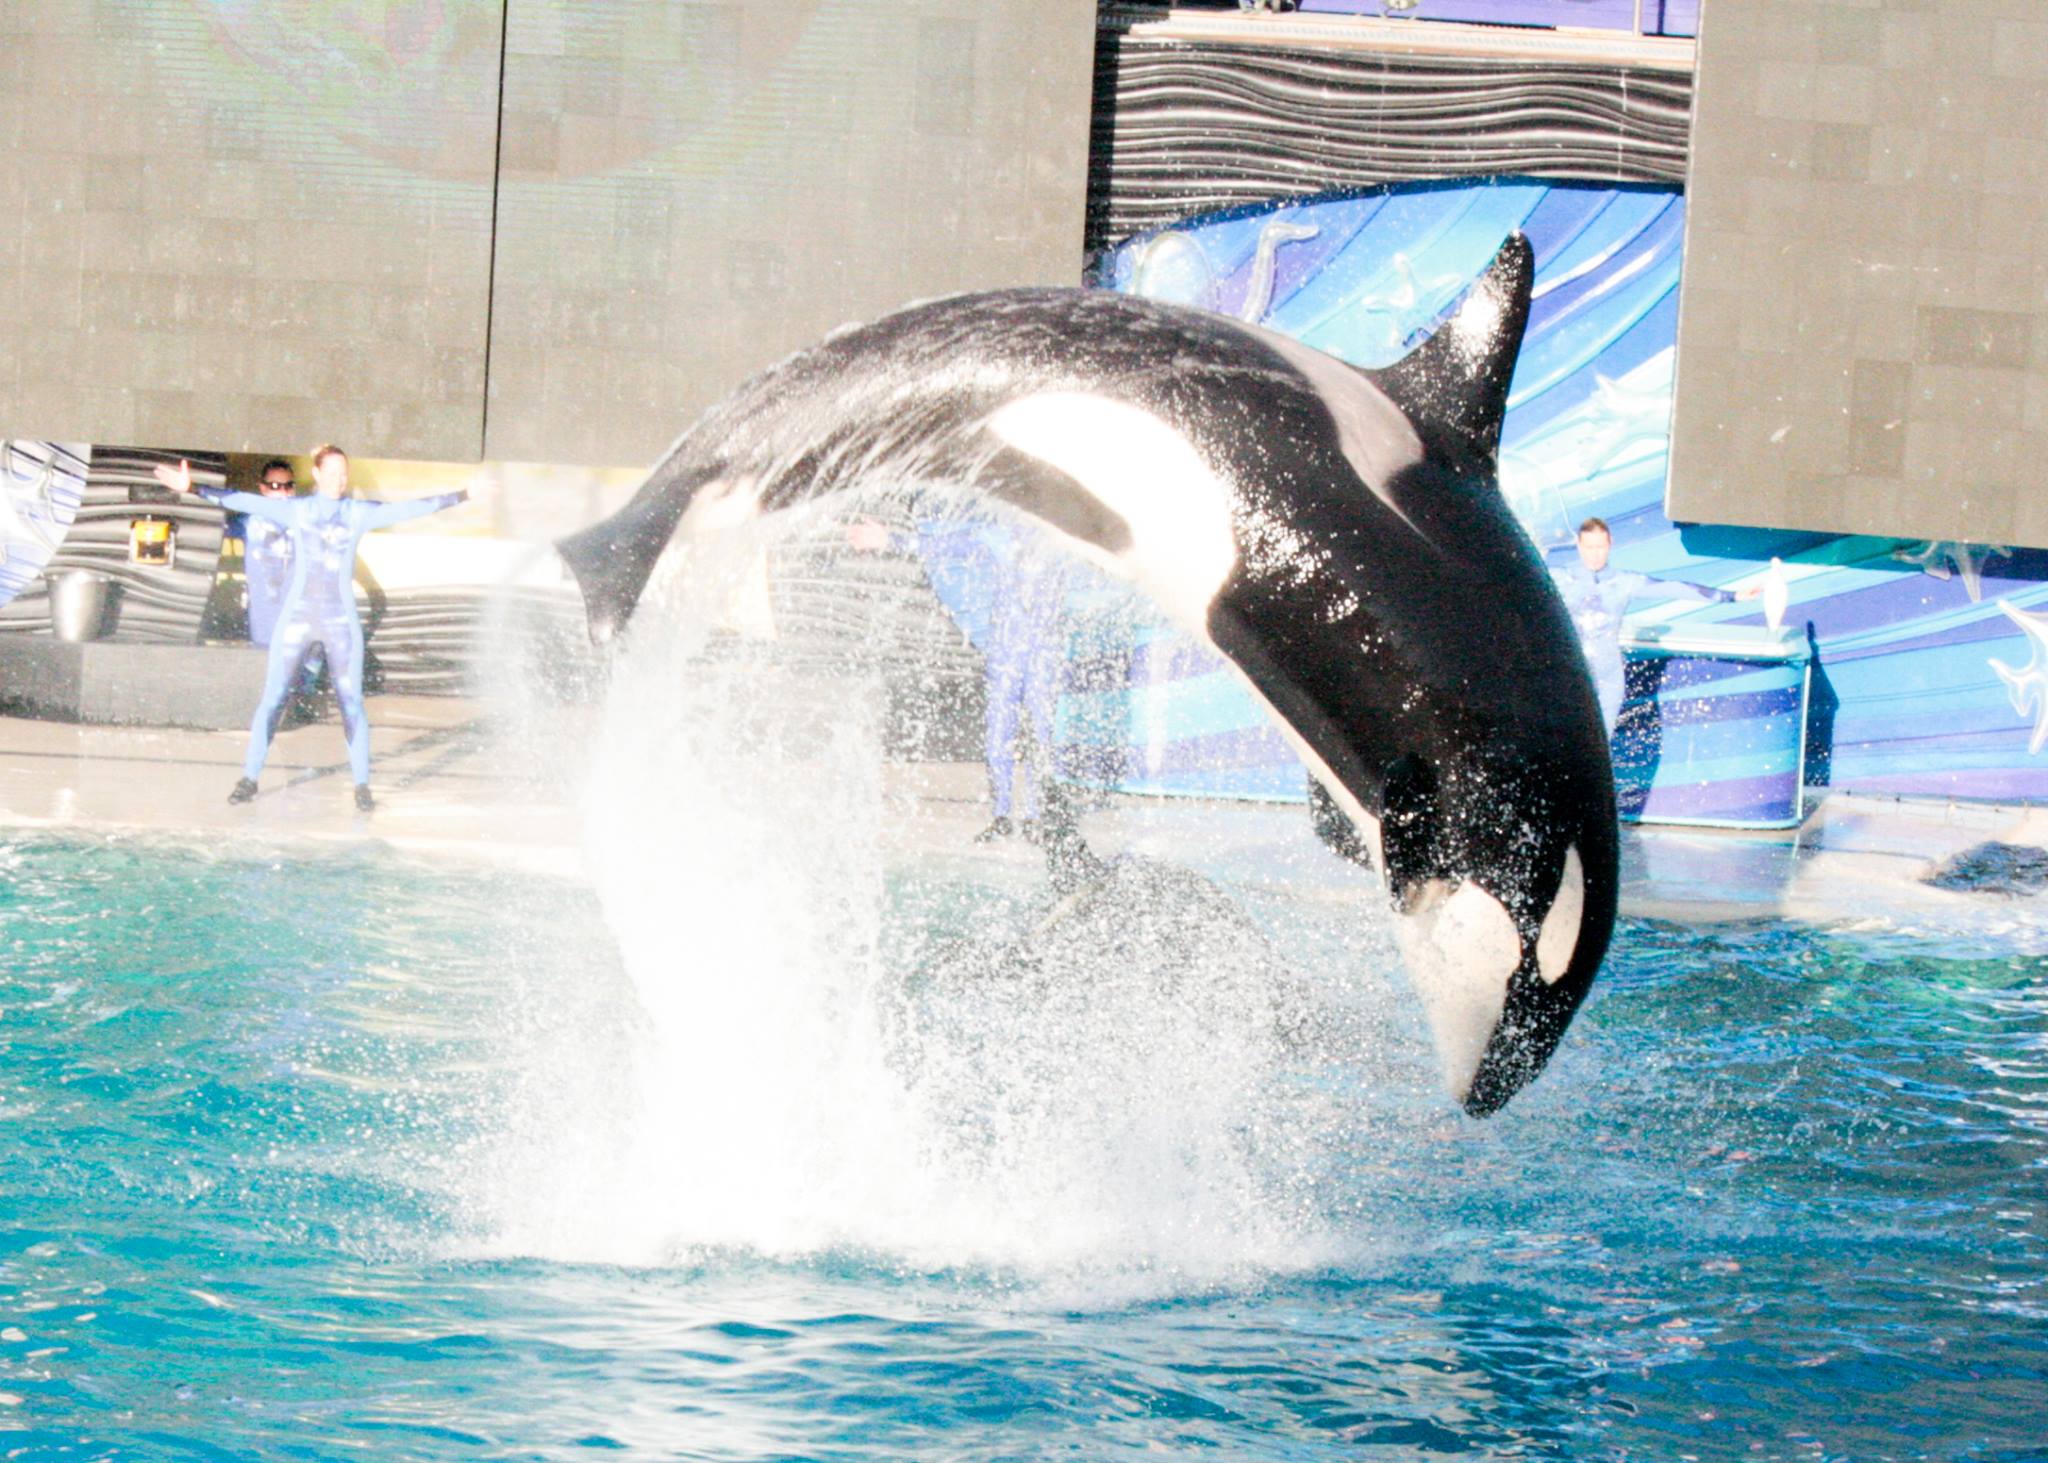 When you're making your list of active vacation ideas in Southern California, don't forget SeaWorld San Diego!